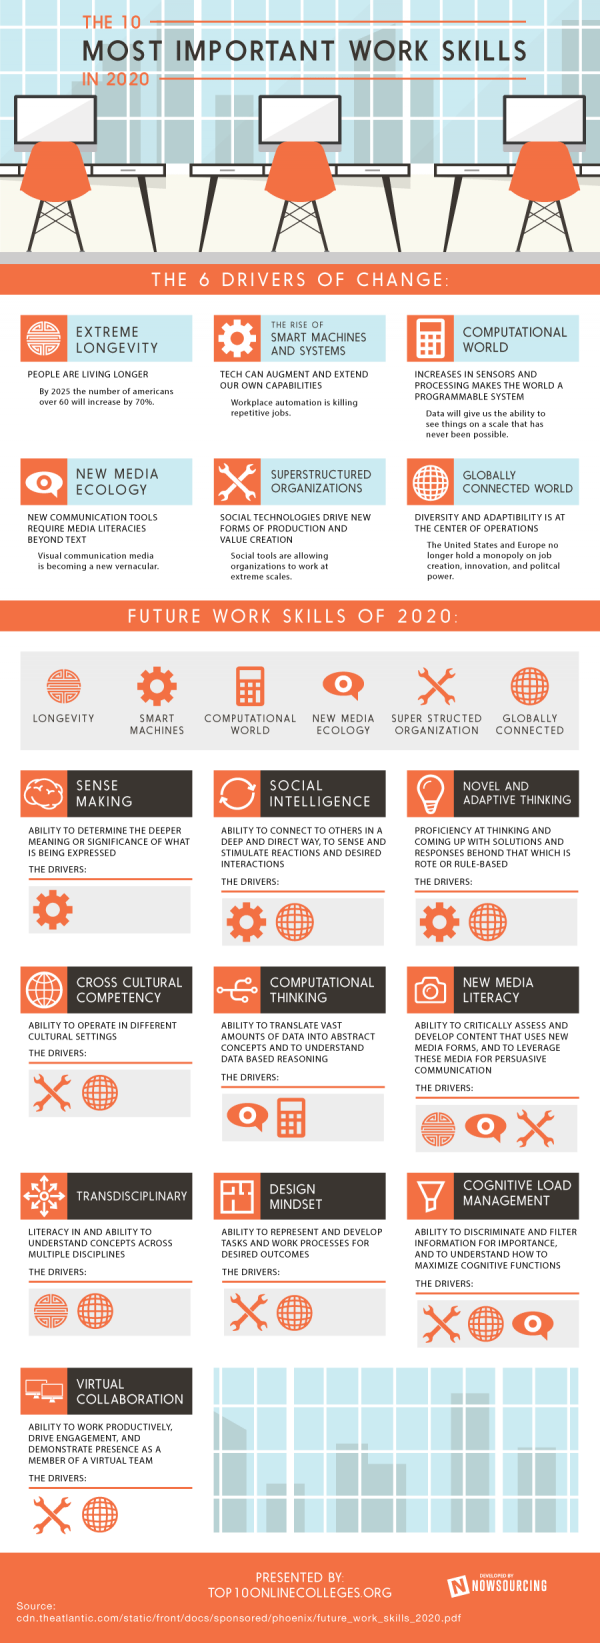 The 10 Most Important Work Skills in 2020 [Infographic]